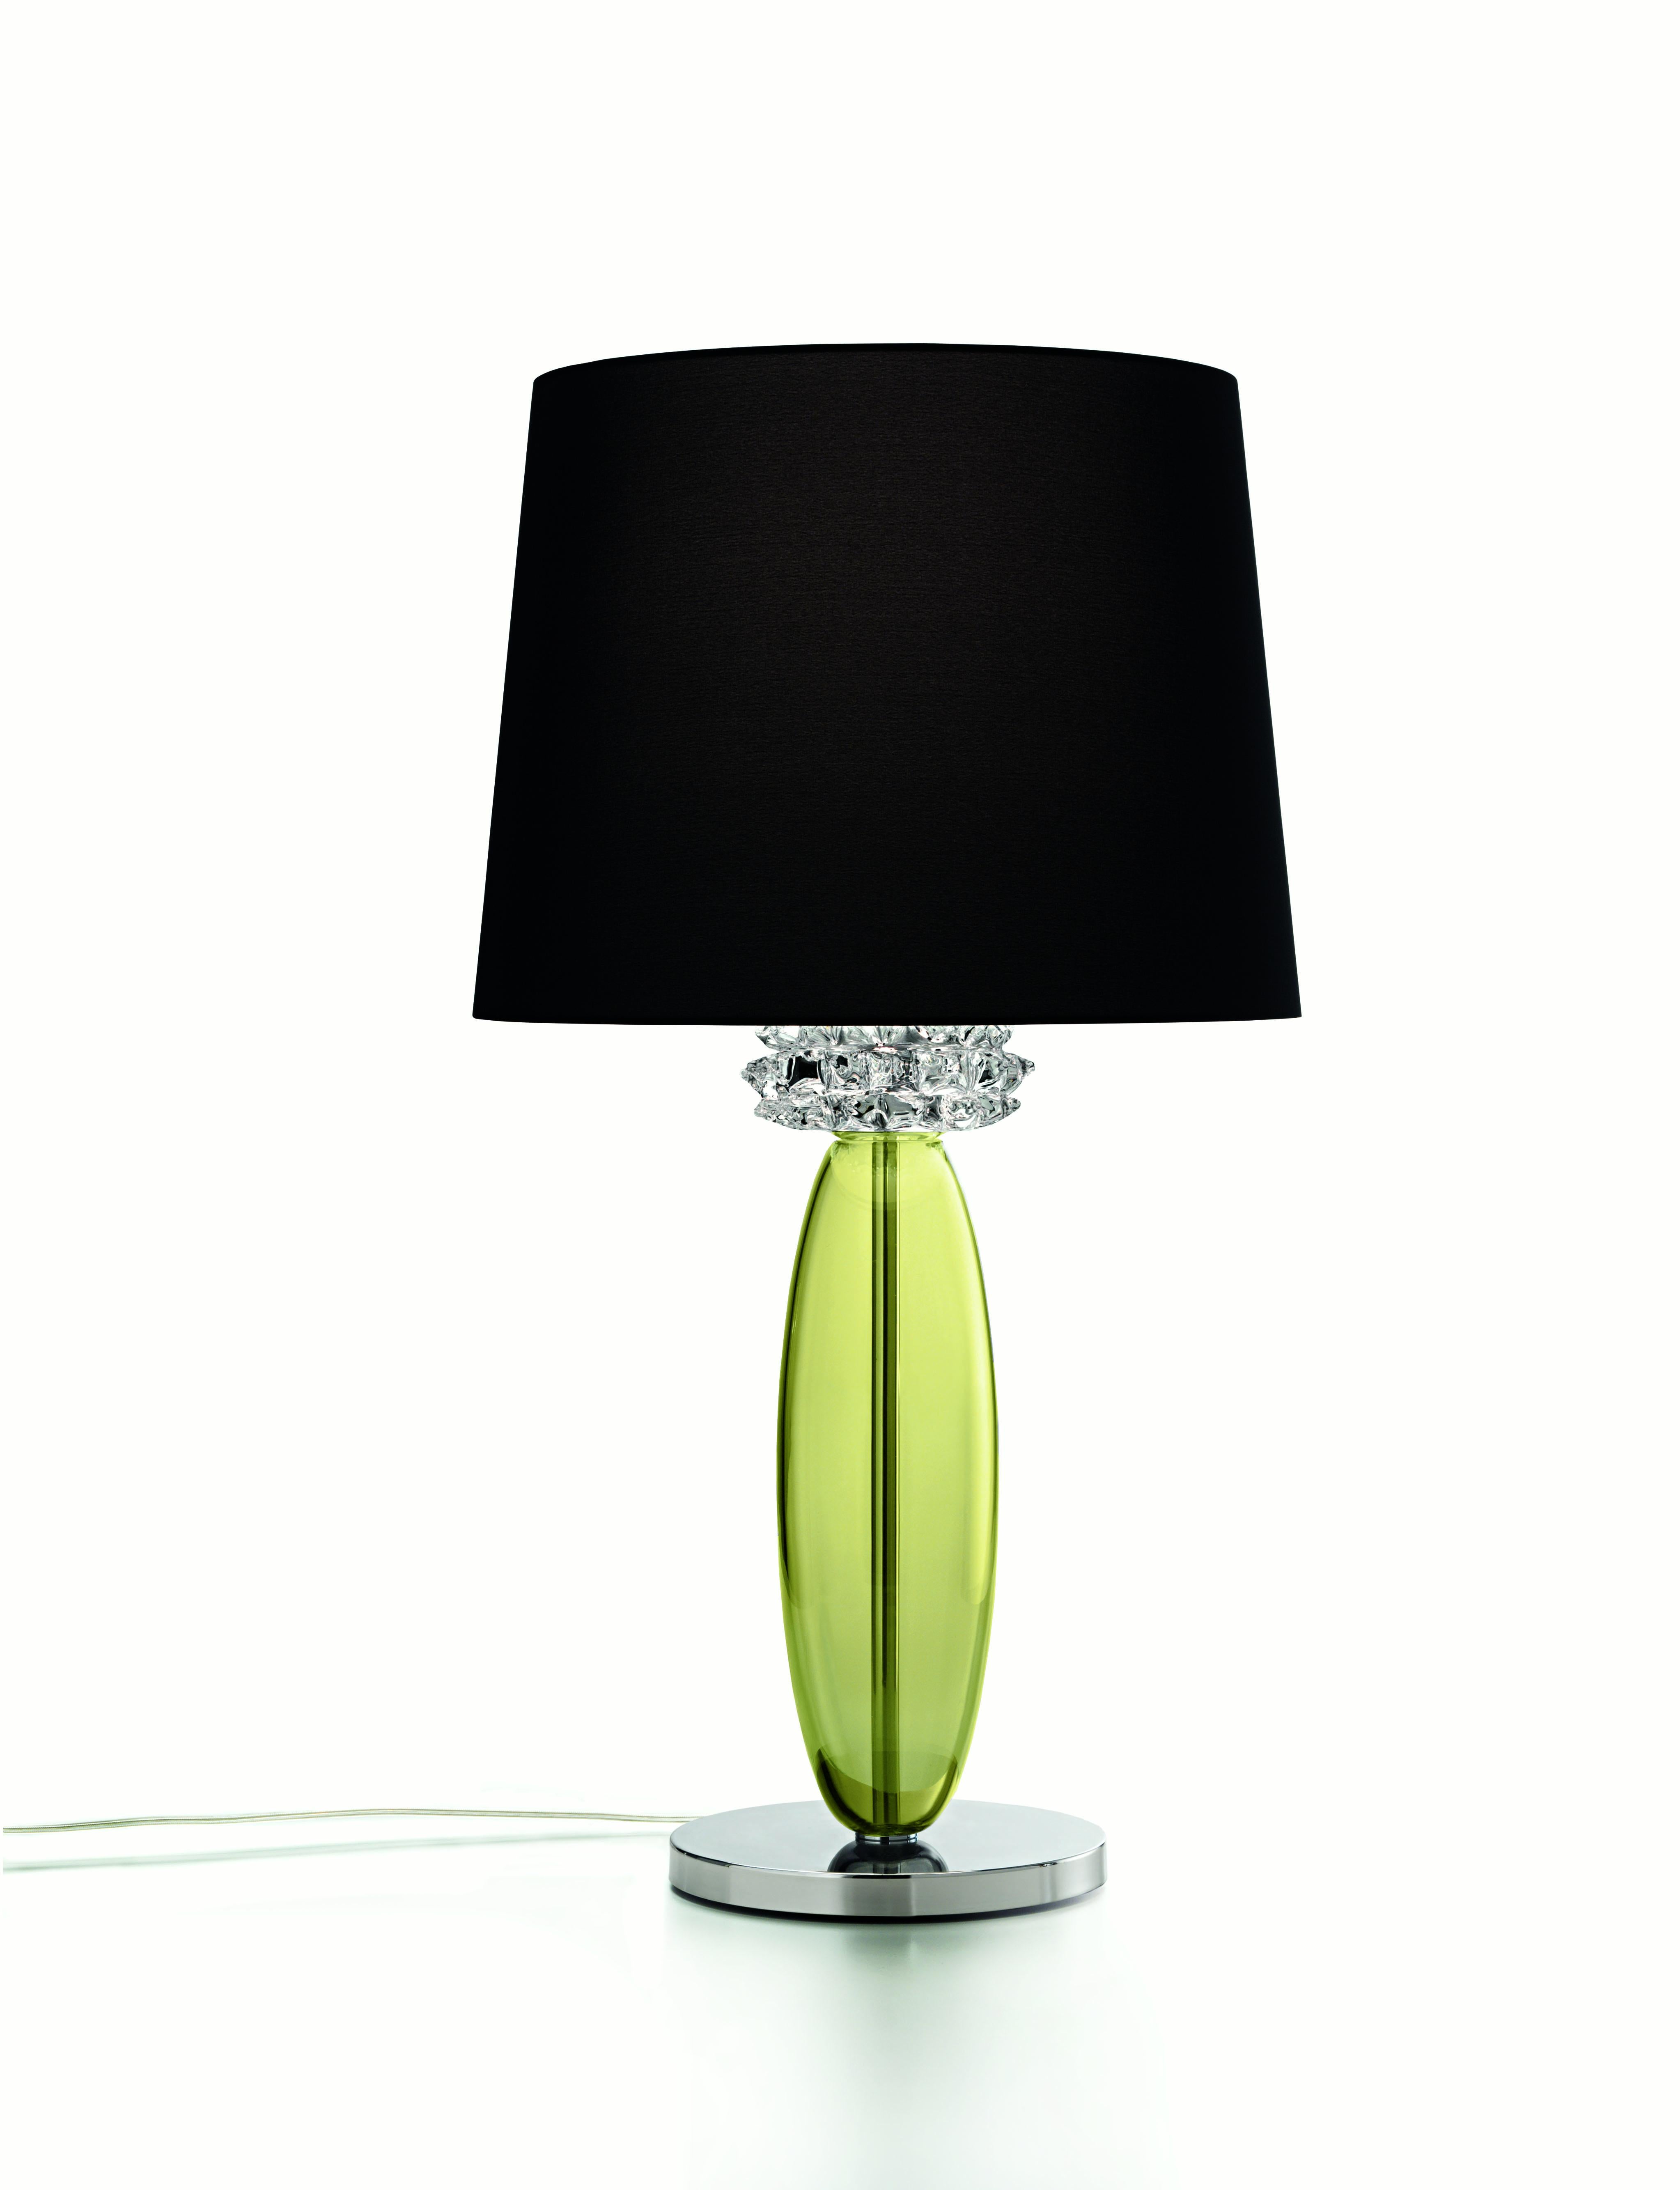 Green (Liquid Citron_EL) Rotterdam 5565 Table Lamp in Glass with Black Shade, by Barovier&Toso 2